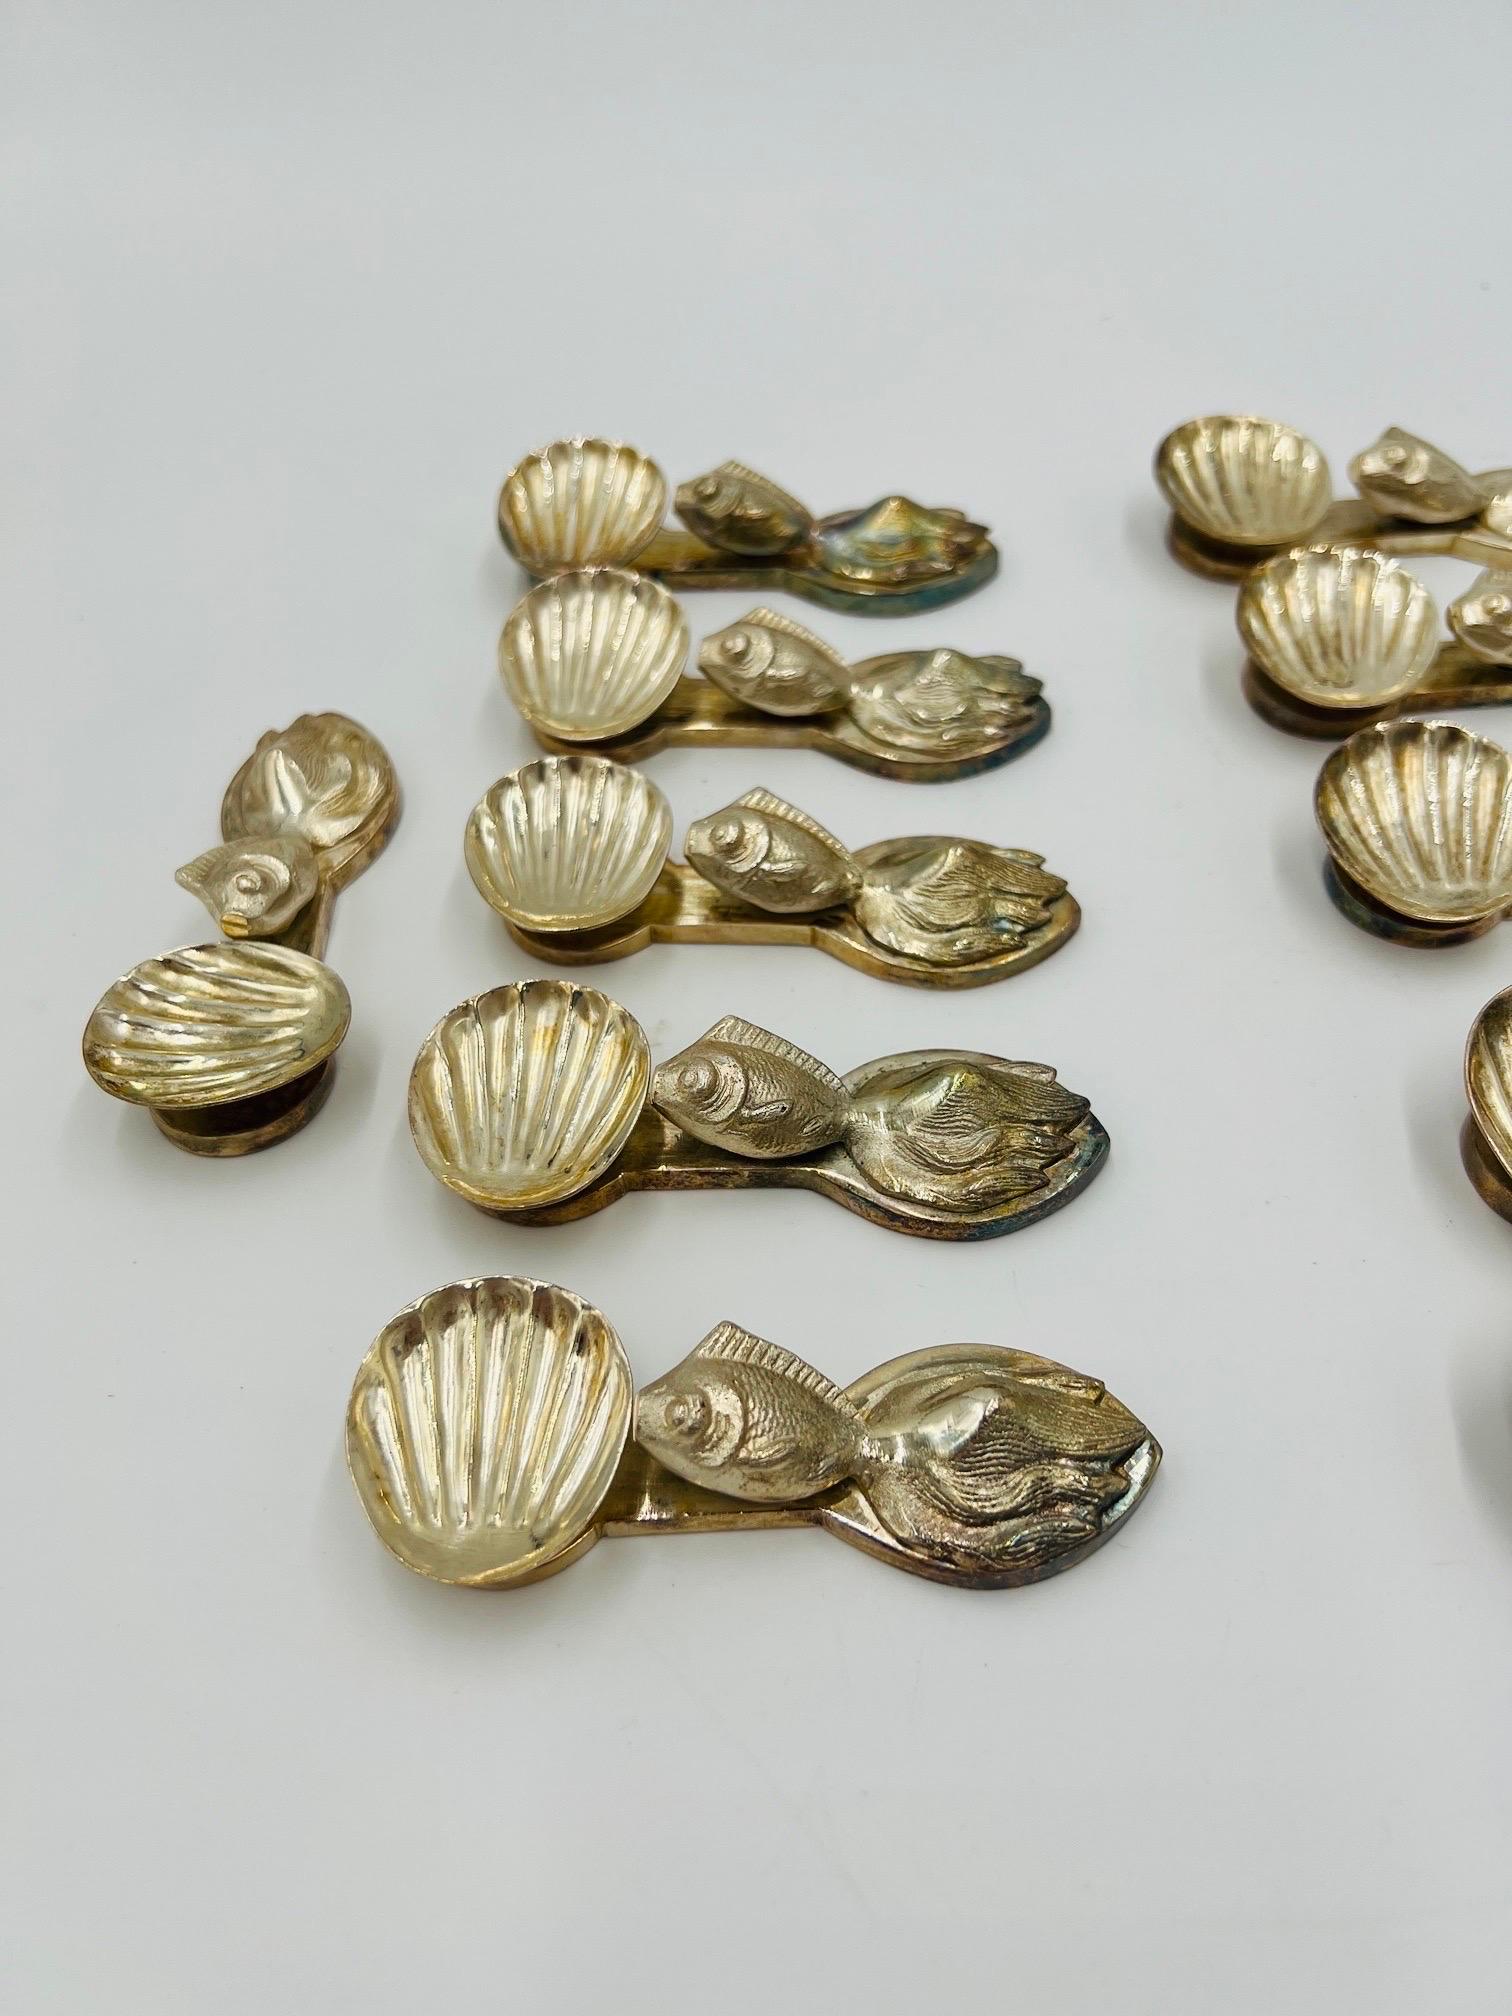 A set of 12 unique individual salt cellars. Each reminiscent of the famous Buccellati silver factory in Italy. They each have a goldfish laying flat across the body and a half shell cellar on the other. Heavy silver-plate over bronze or heavy metal.